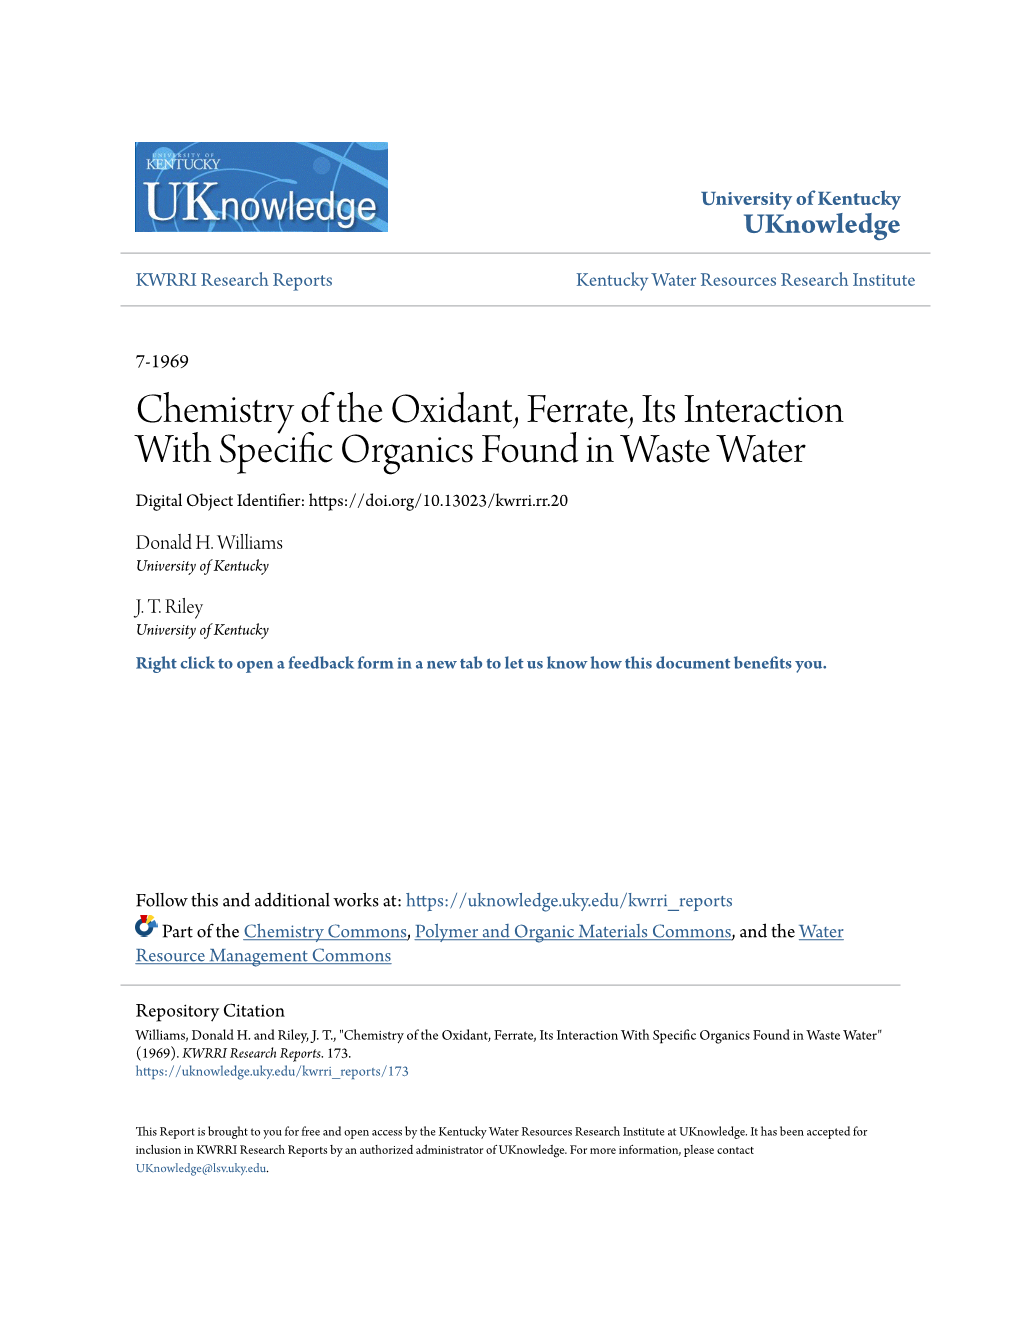 Chemistry of the Oxidant, Ferrate, Its Interaction with Specific Organics Found in Waste Water Digital Object Identifier